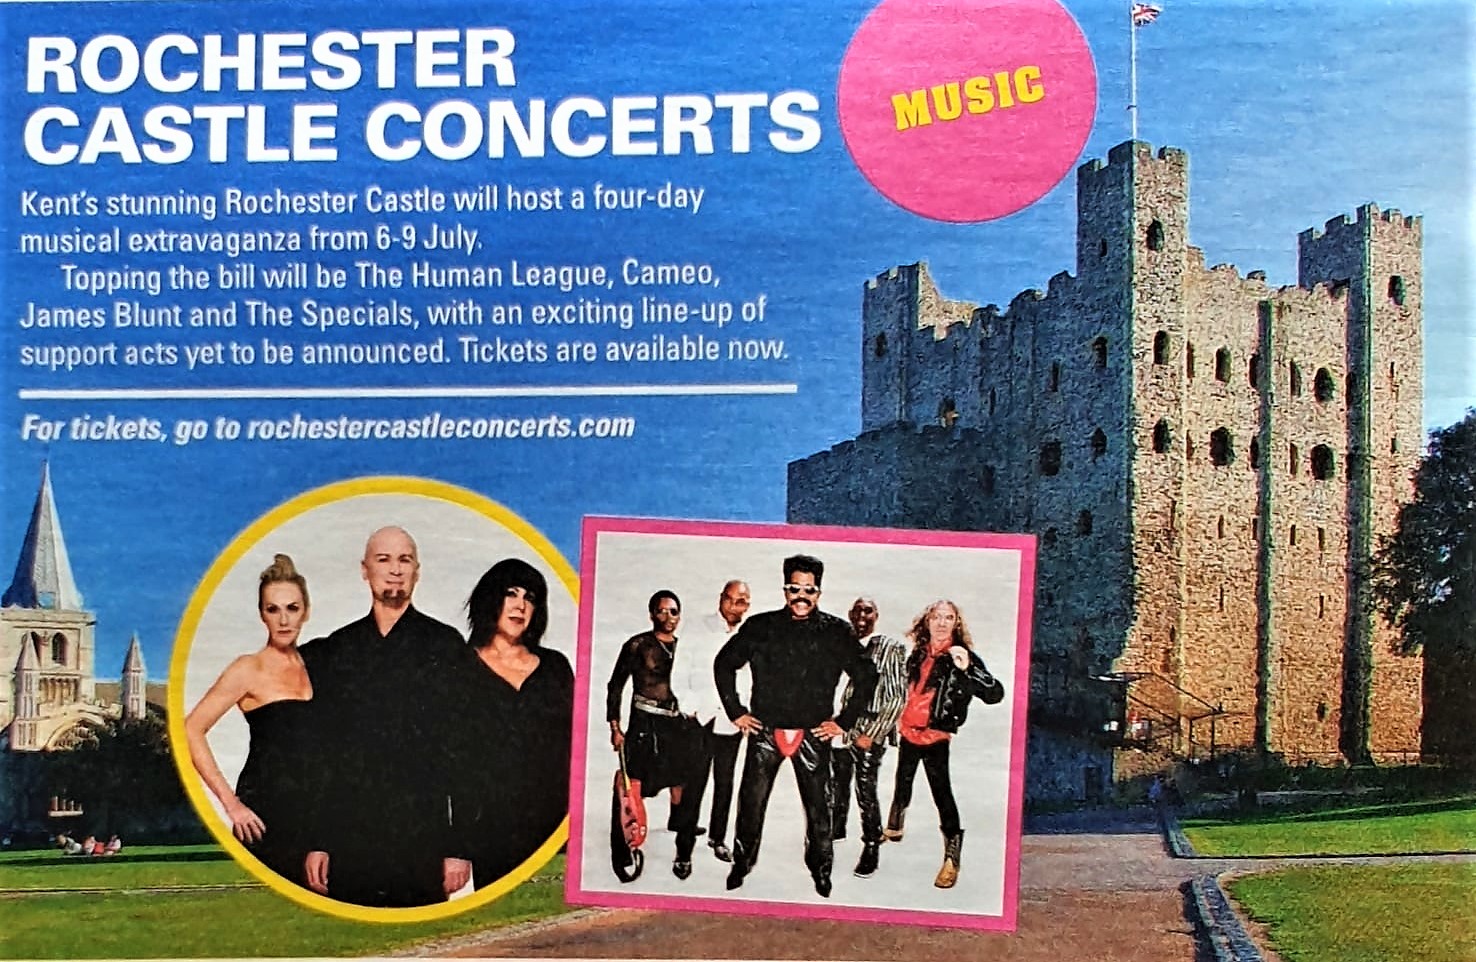 PREVIEW: Rochester Castle Concerts